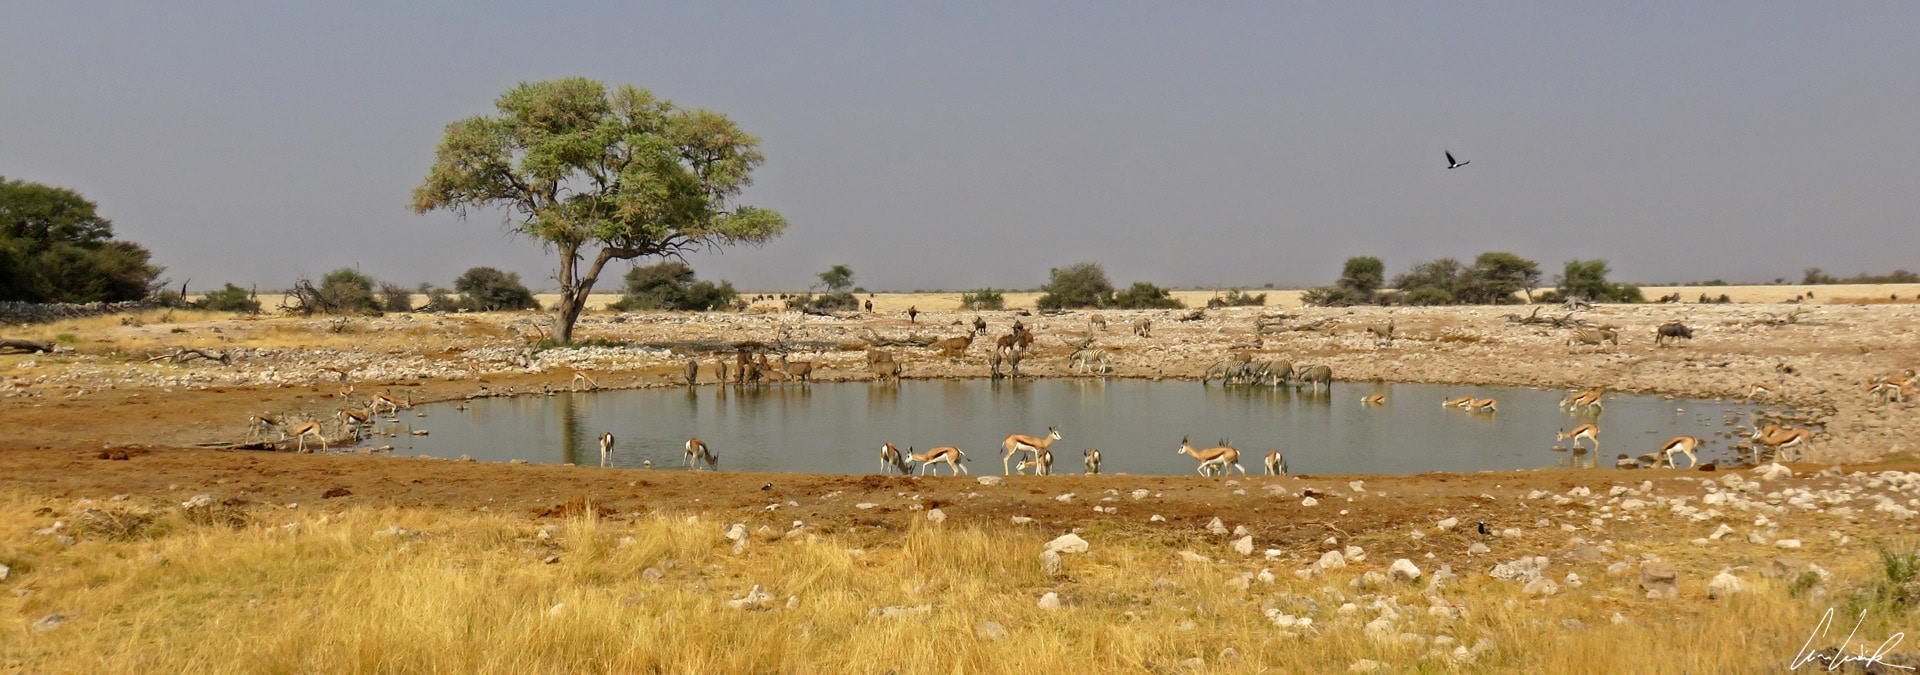 Etosha's water holes are undoubtedly the most frequented places in the park. The diversity of animal species drinking at the same time is quite surprising.